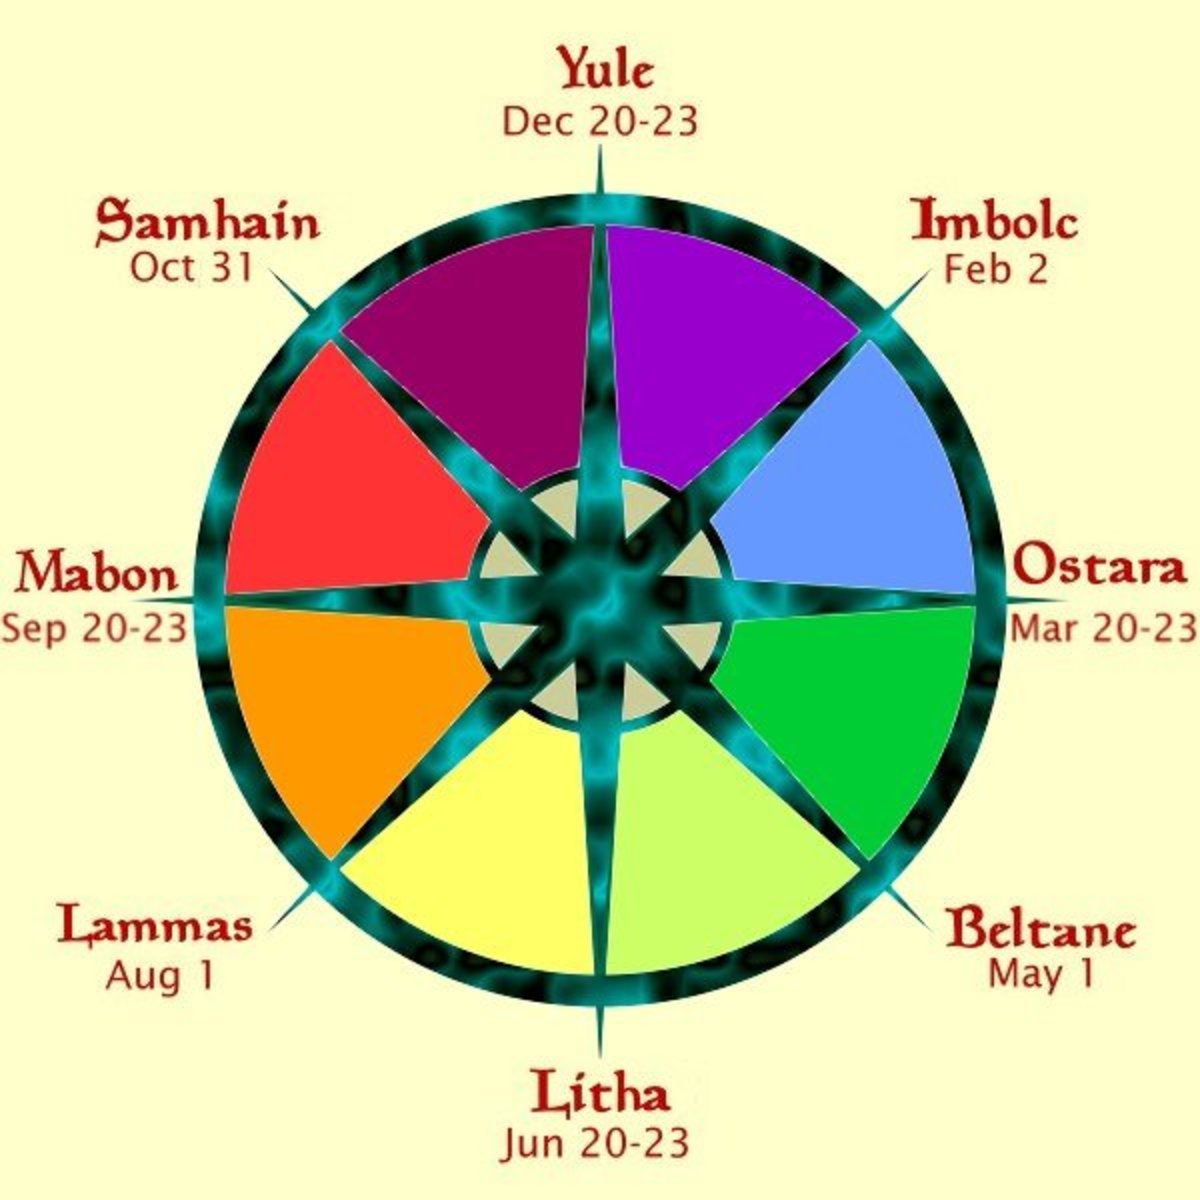 Wiccan Holidays and Ritual Days Explained!